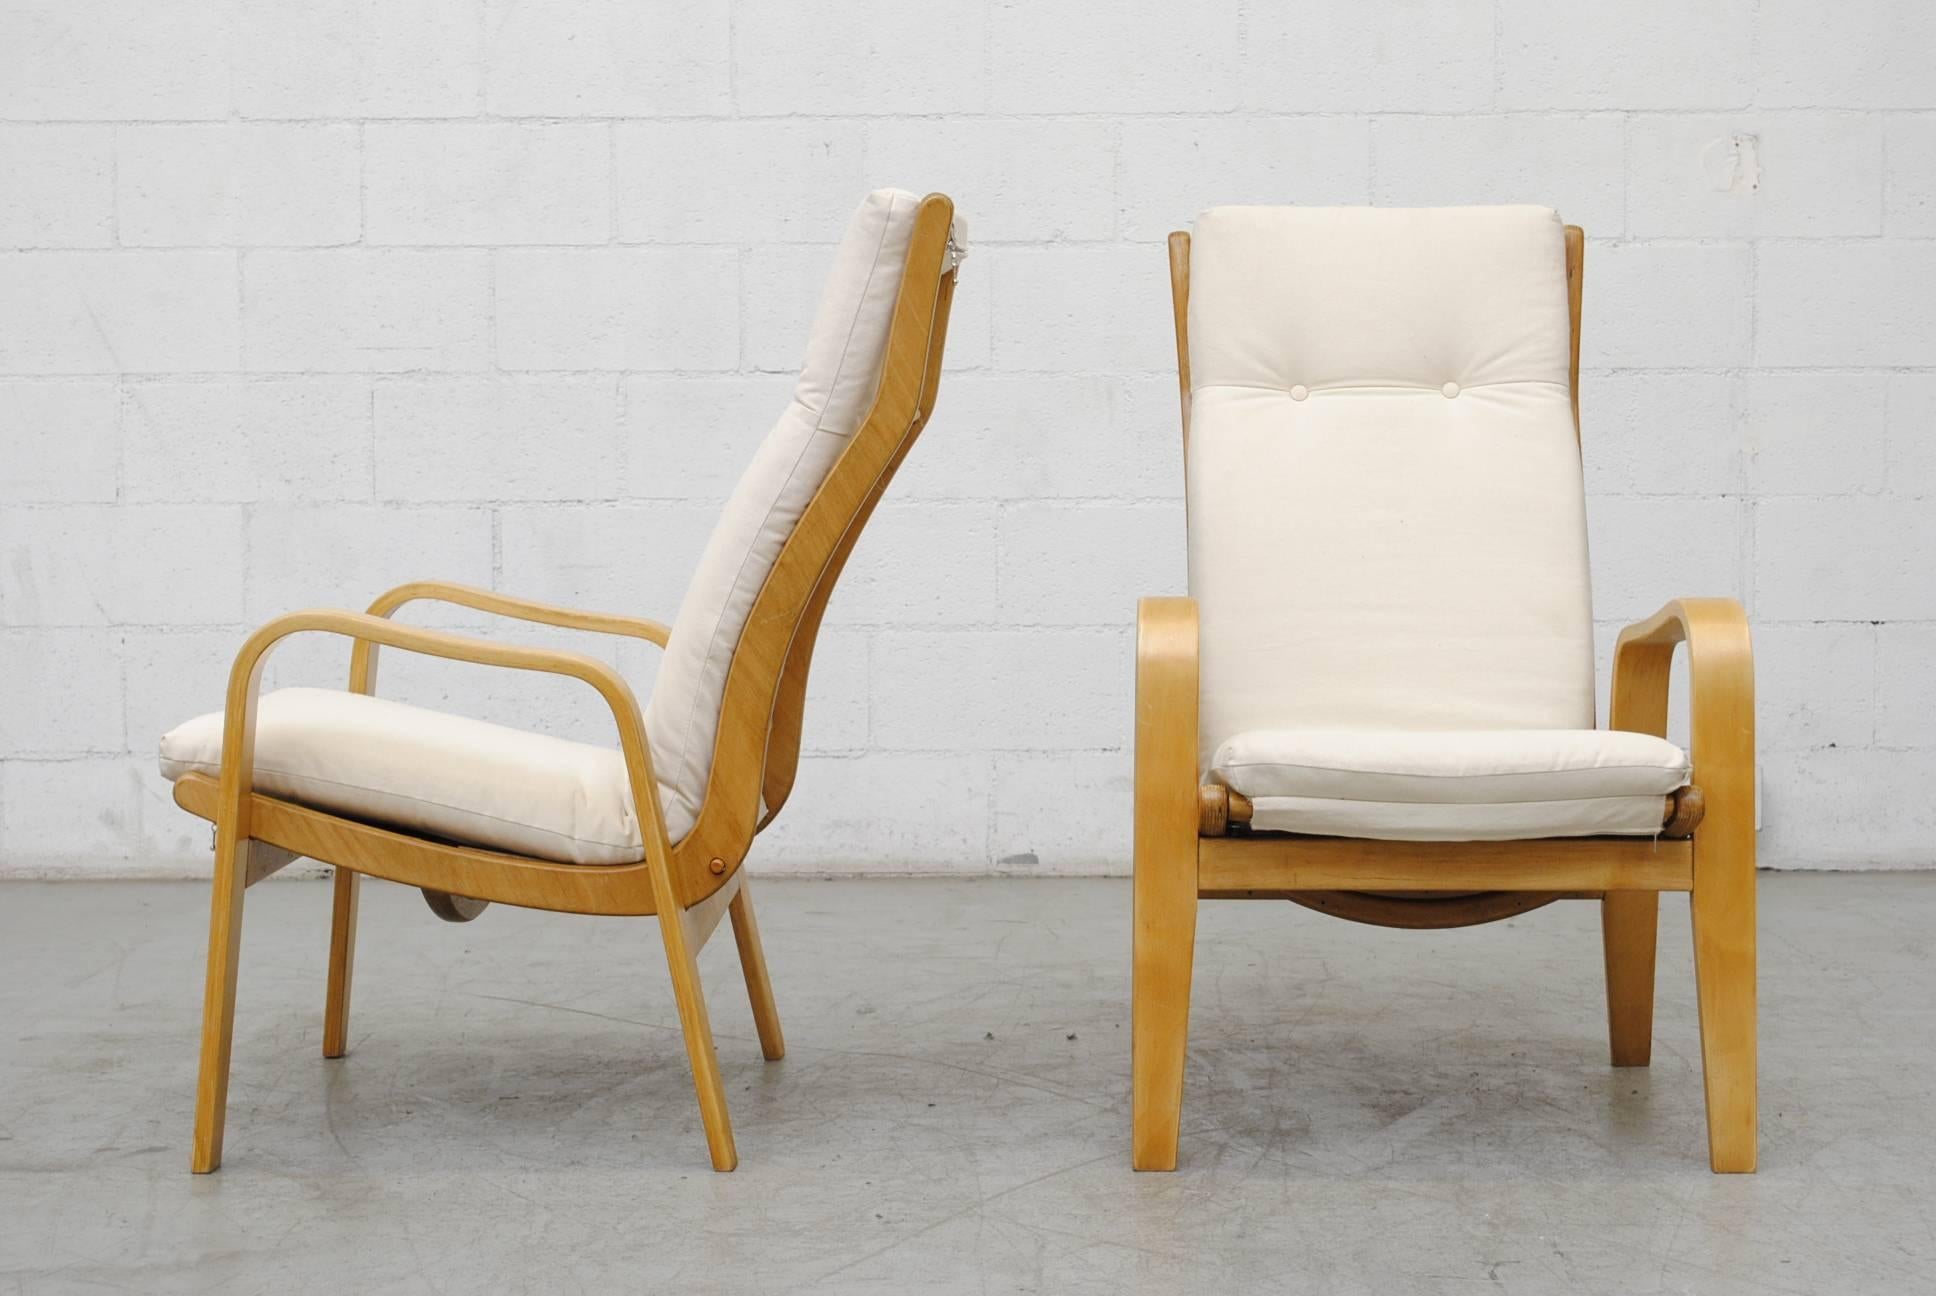 Pair of lounge chairs newly upholstered in natural canvas by Cees Braakman for Pastoe. Bent natural plywood frame in the style of Alvar Aalto. In good original condition with some signs of wear consistent with age and use.